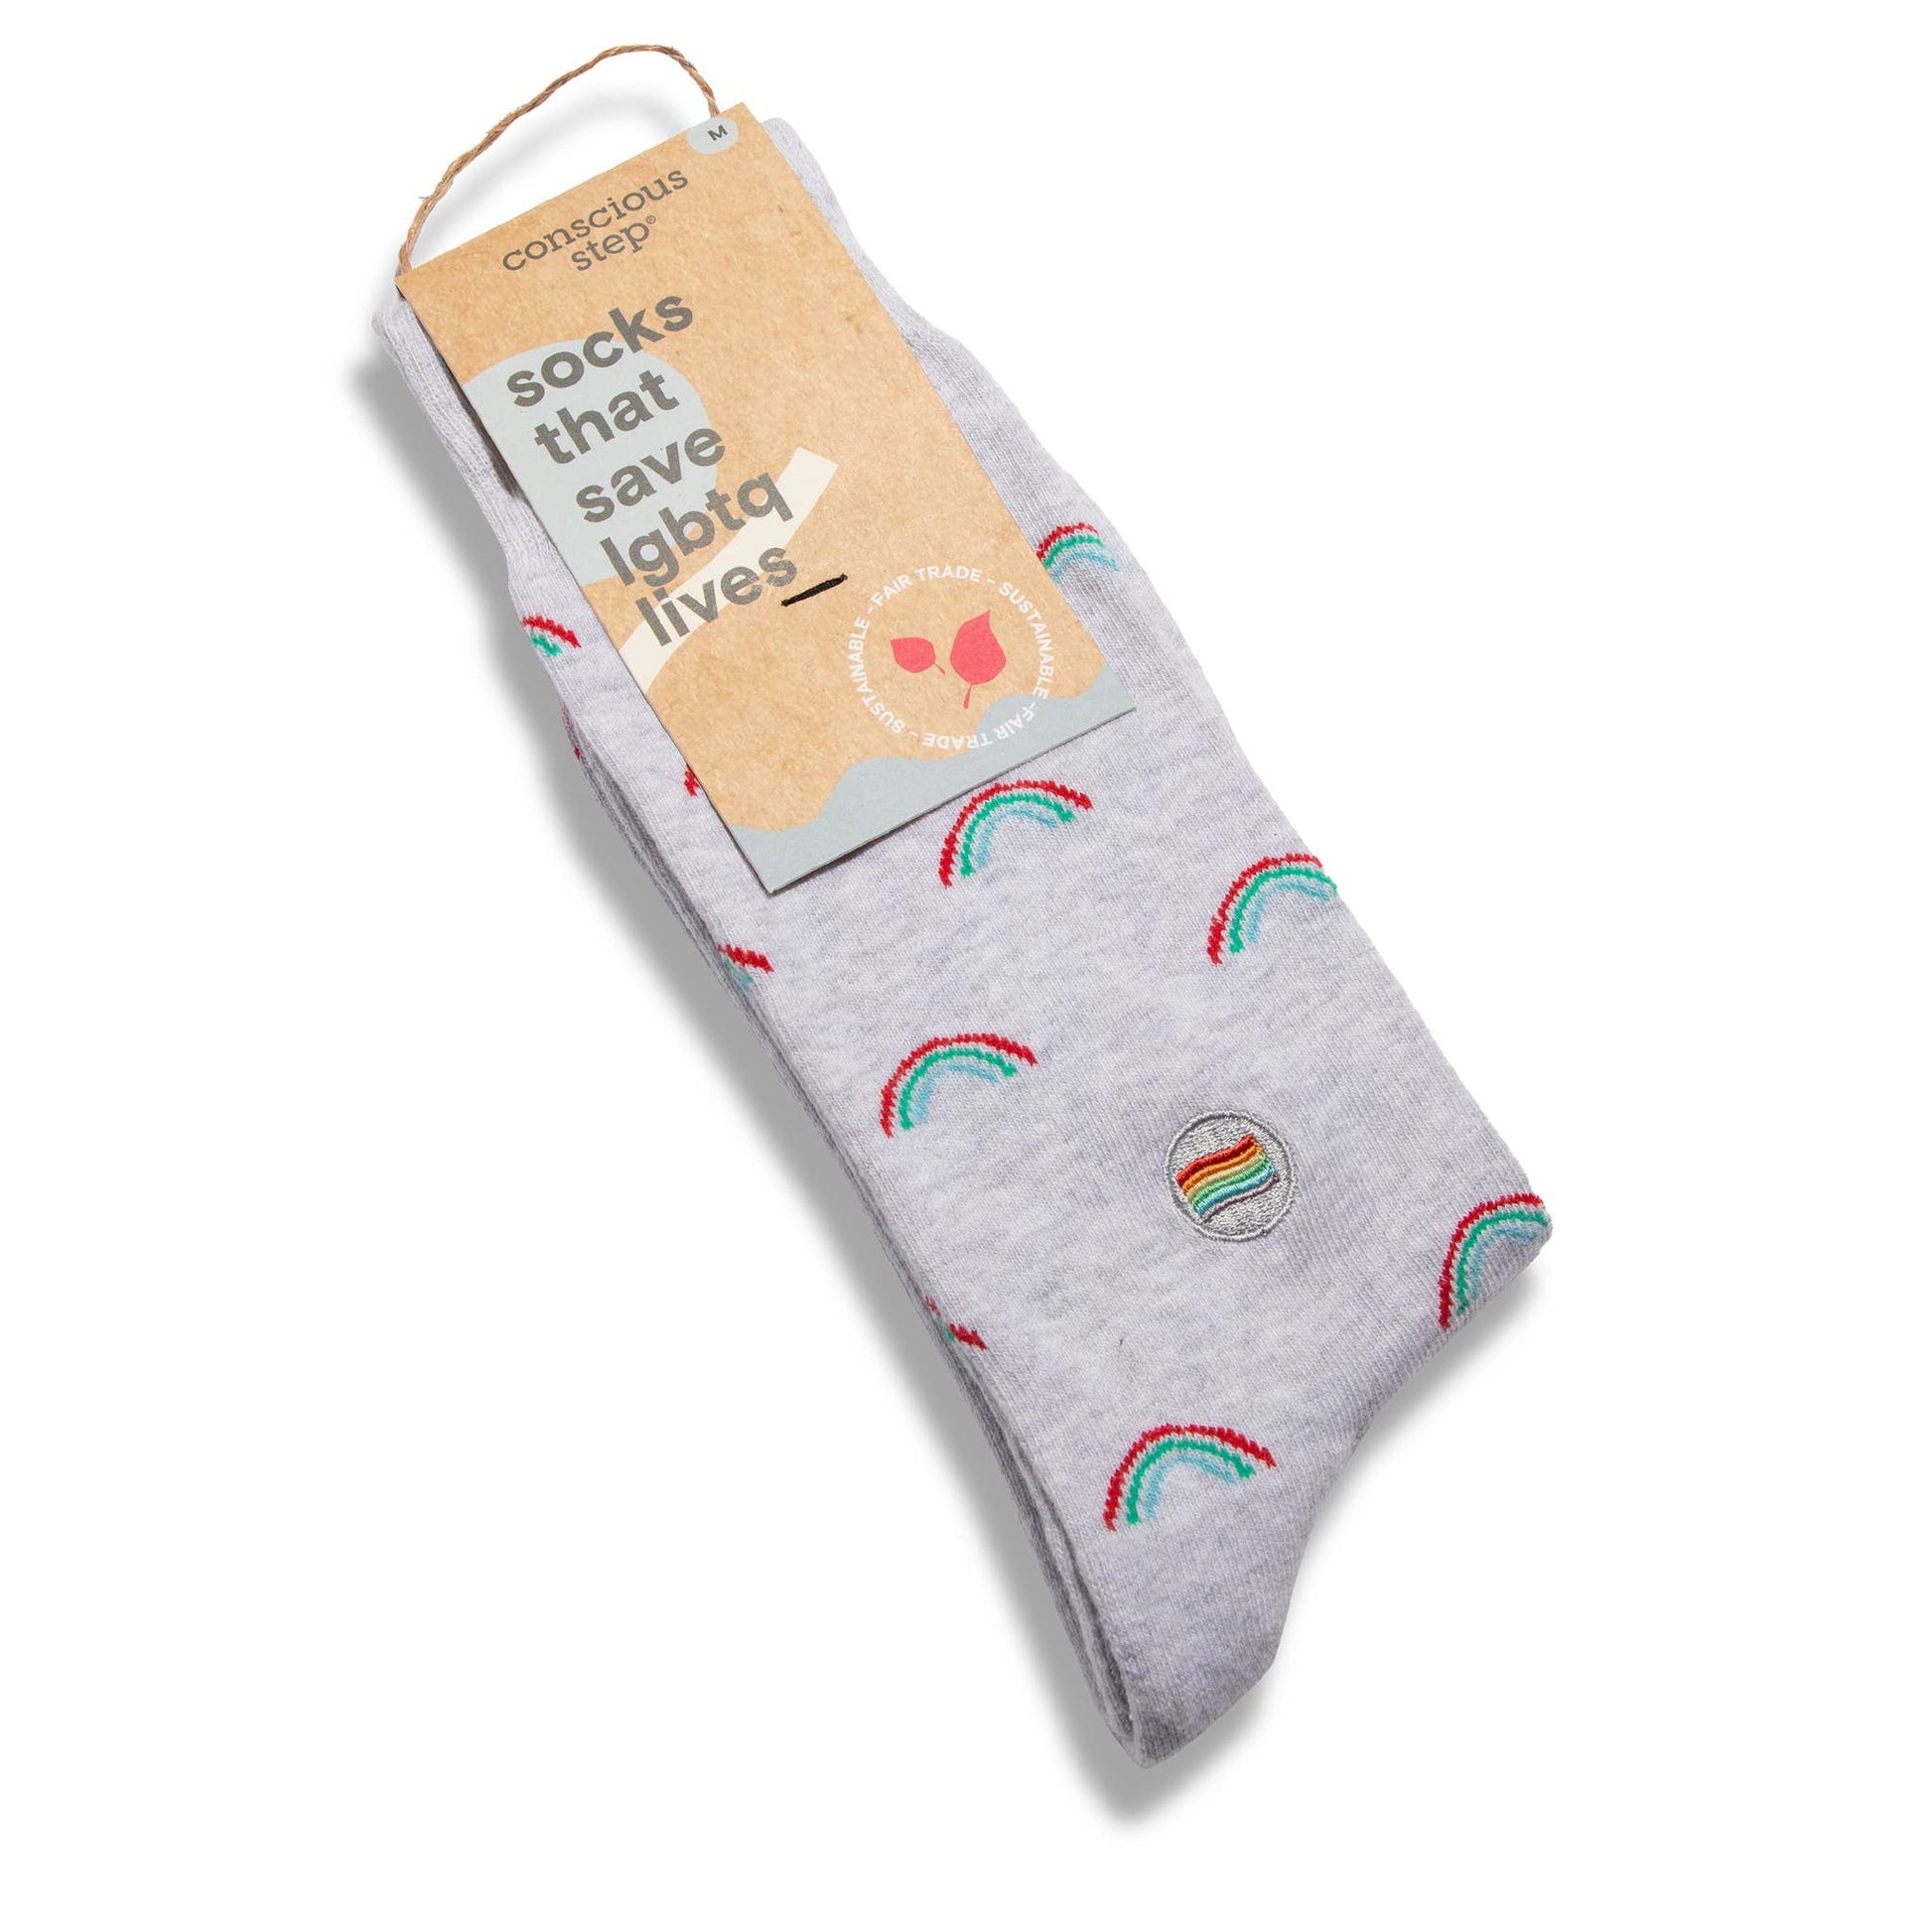 Conscious Step - Socks that Save LGBTQ Lives (Radiant Rainbows)  Conscious Step   -better made easy-eco-friendly-sustainable-gifting